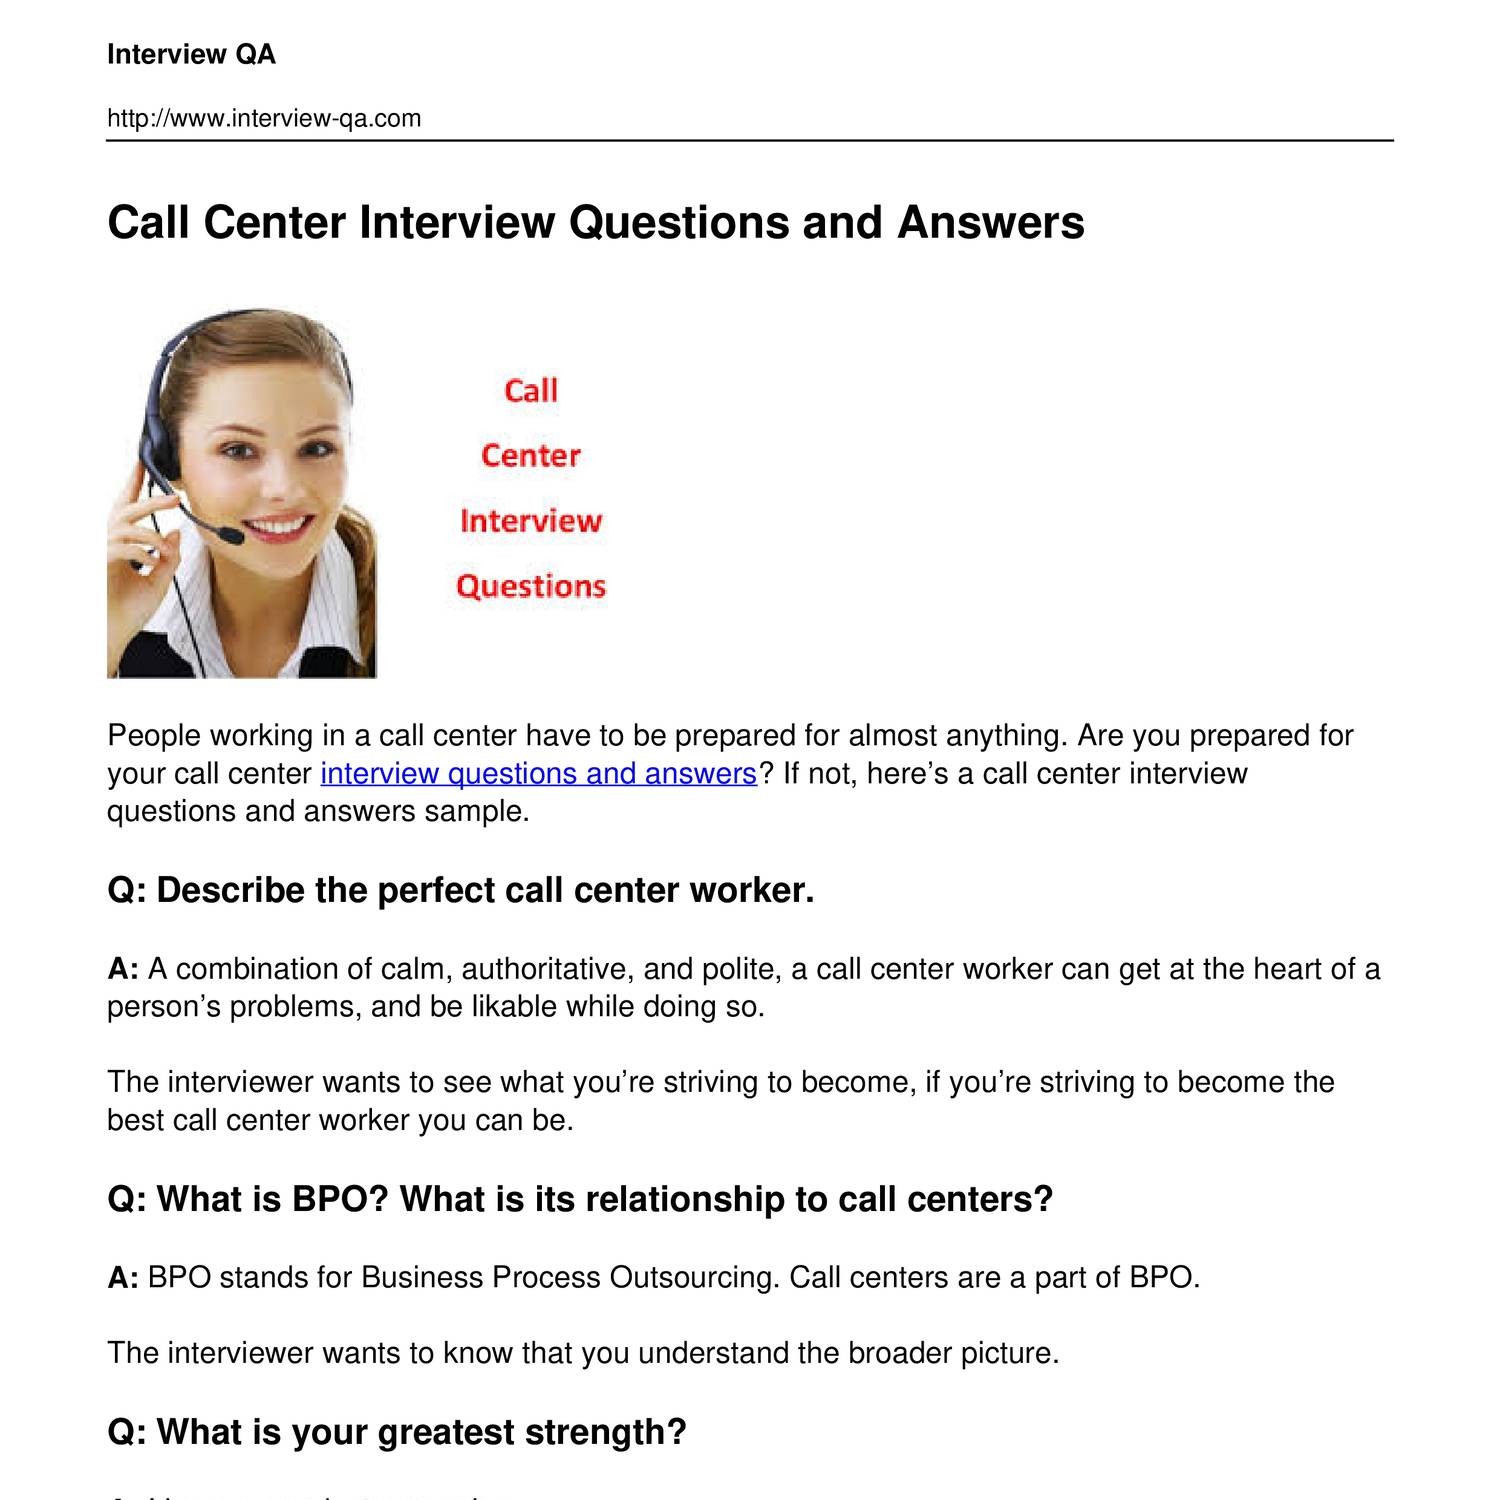 call-center-interview-questions-and-answers.pdf | DocDroid